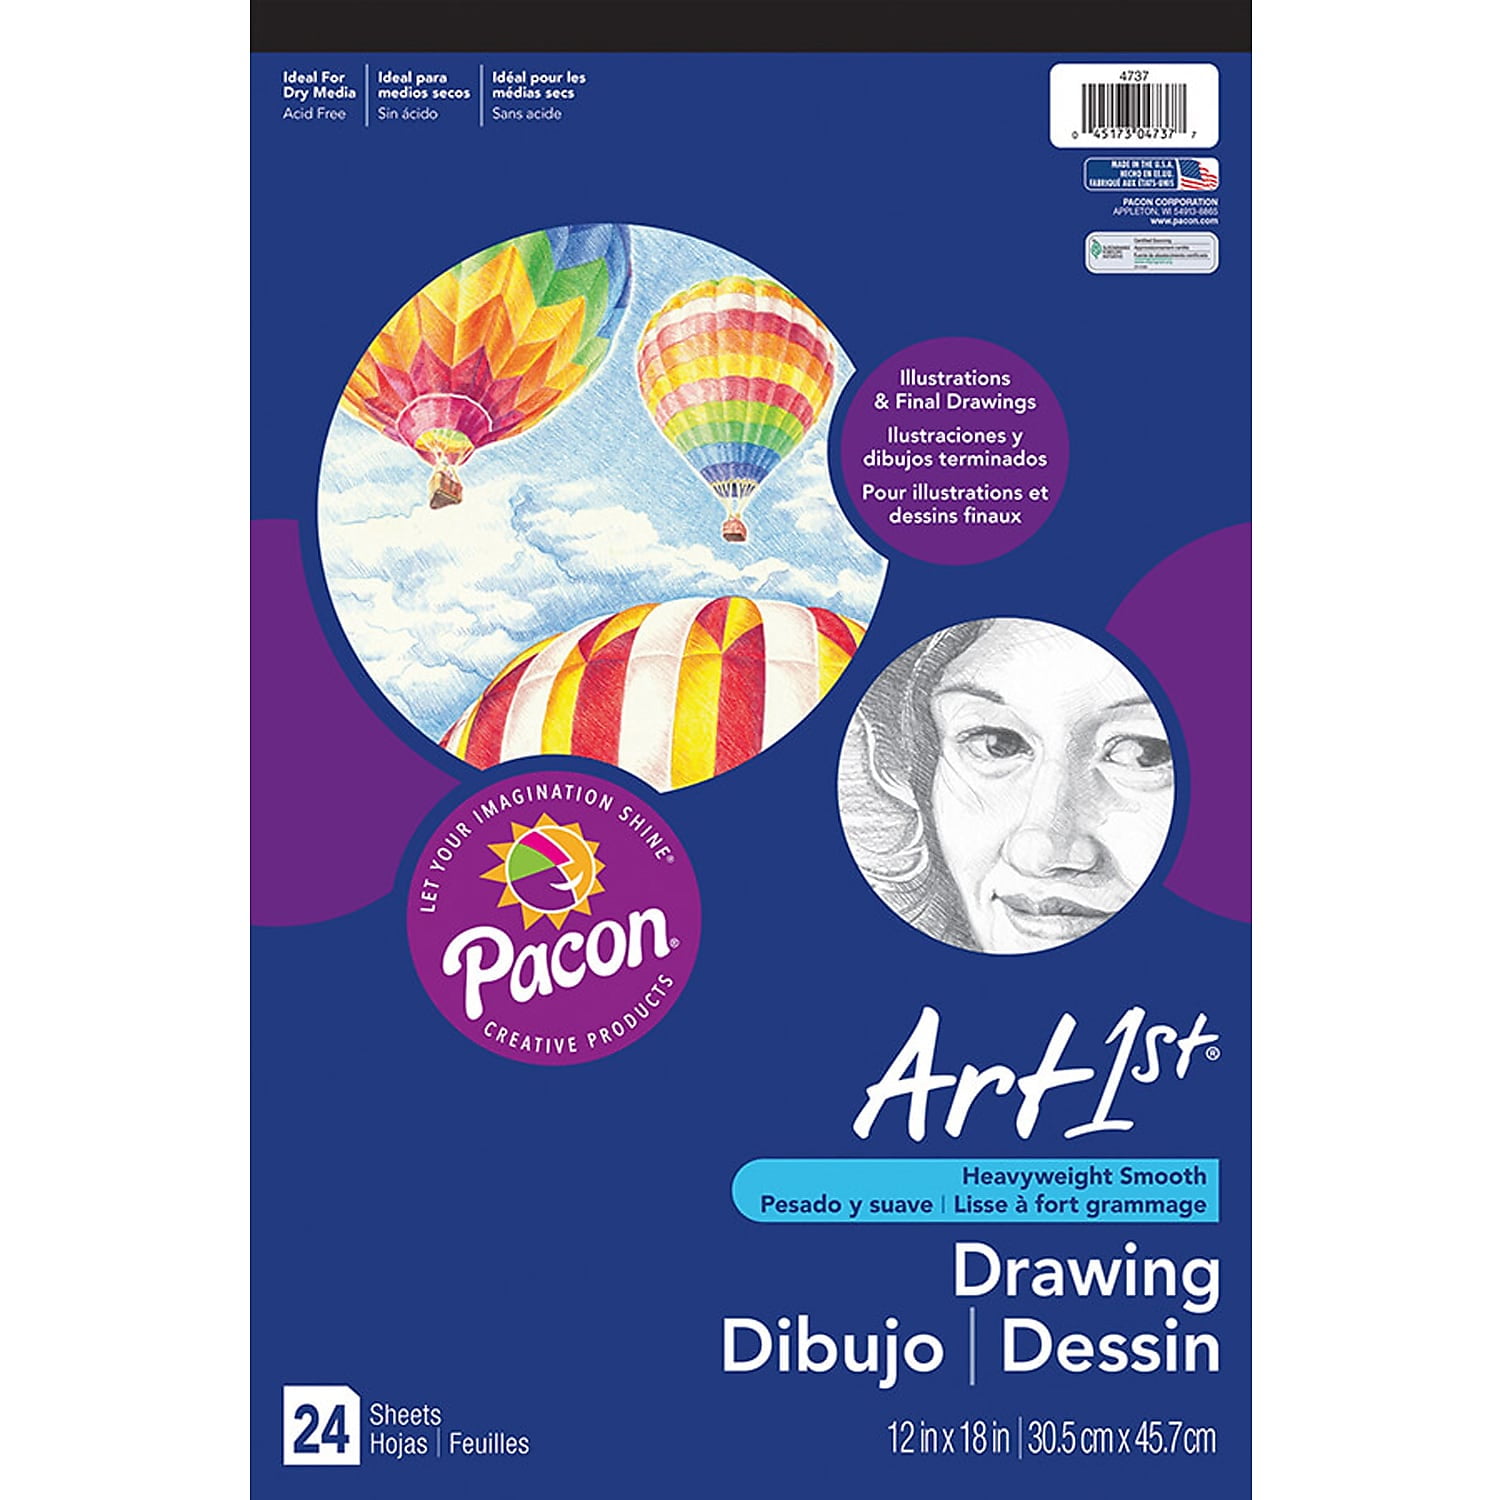 Grumbacher Mixed Media Art Paper Pad 5.5x8.5 98lb/160GSM, 60 Paper Sheets,  Side Wire. Great for all ages. 